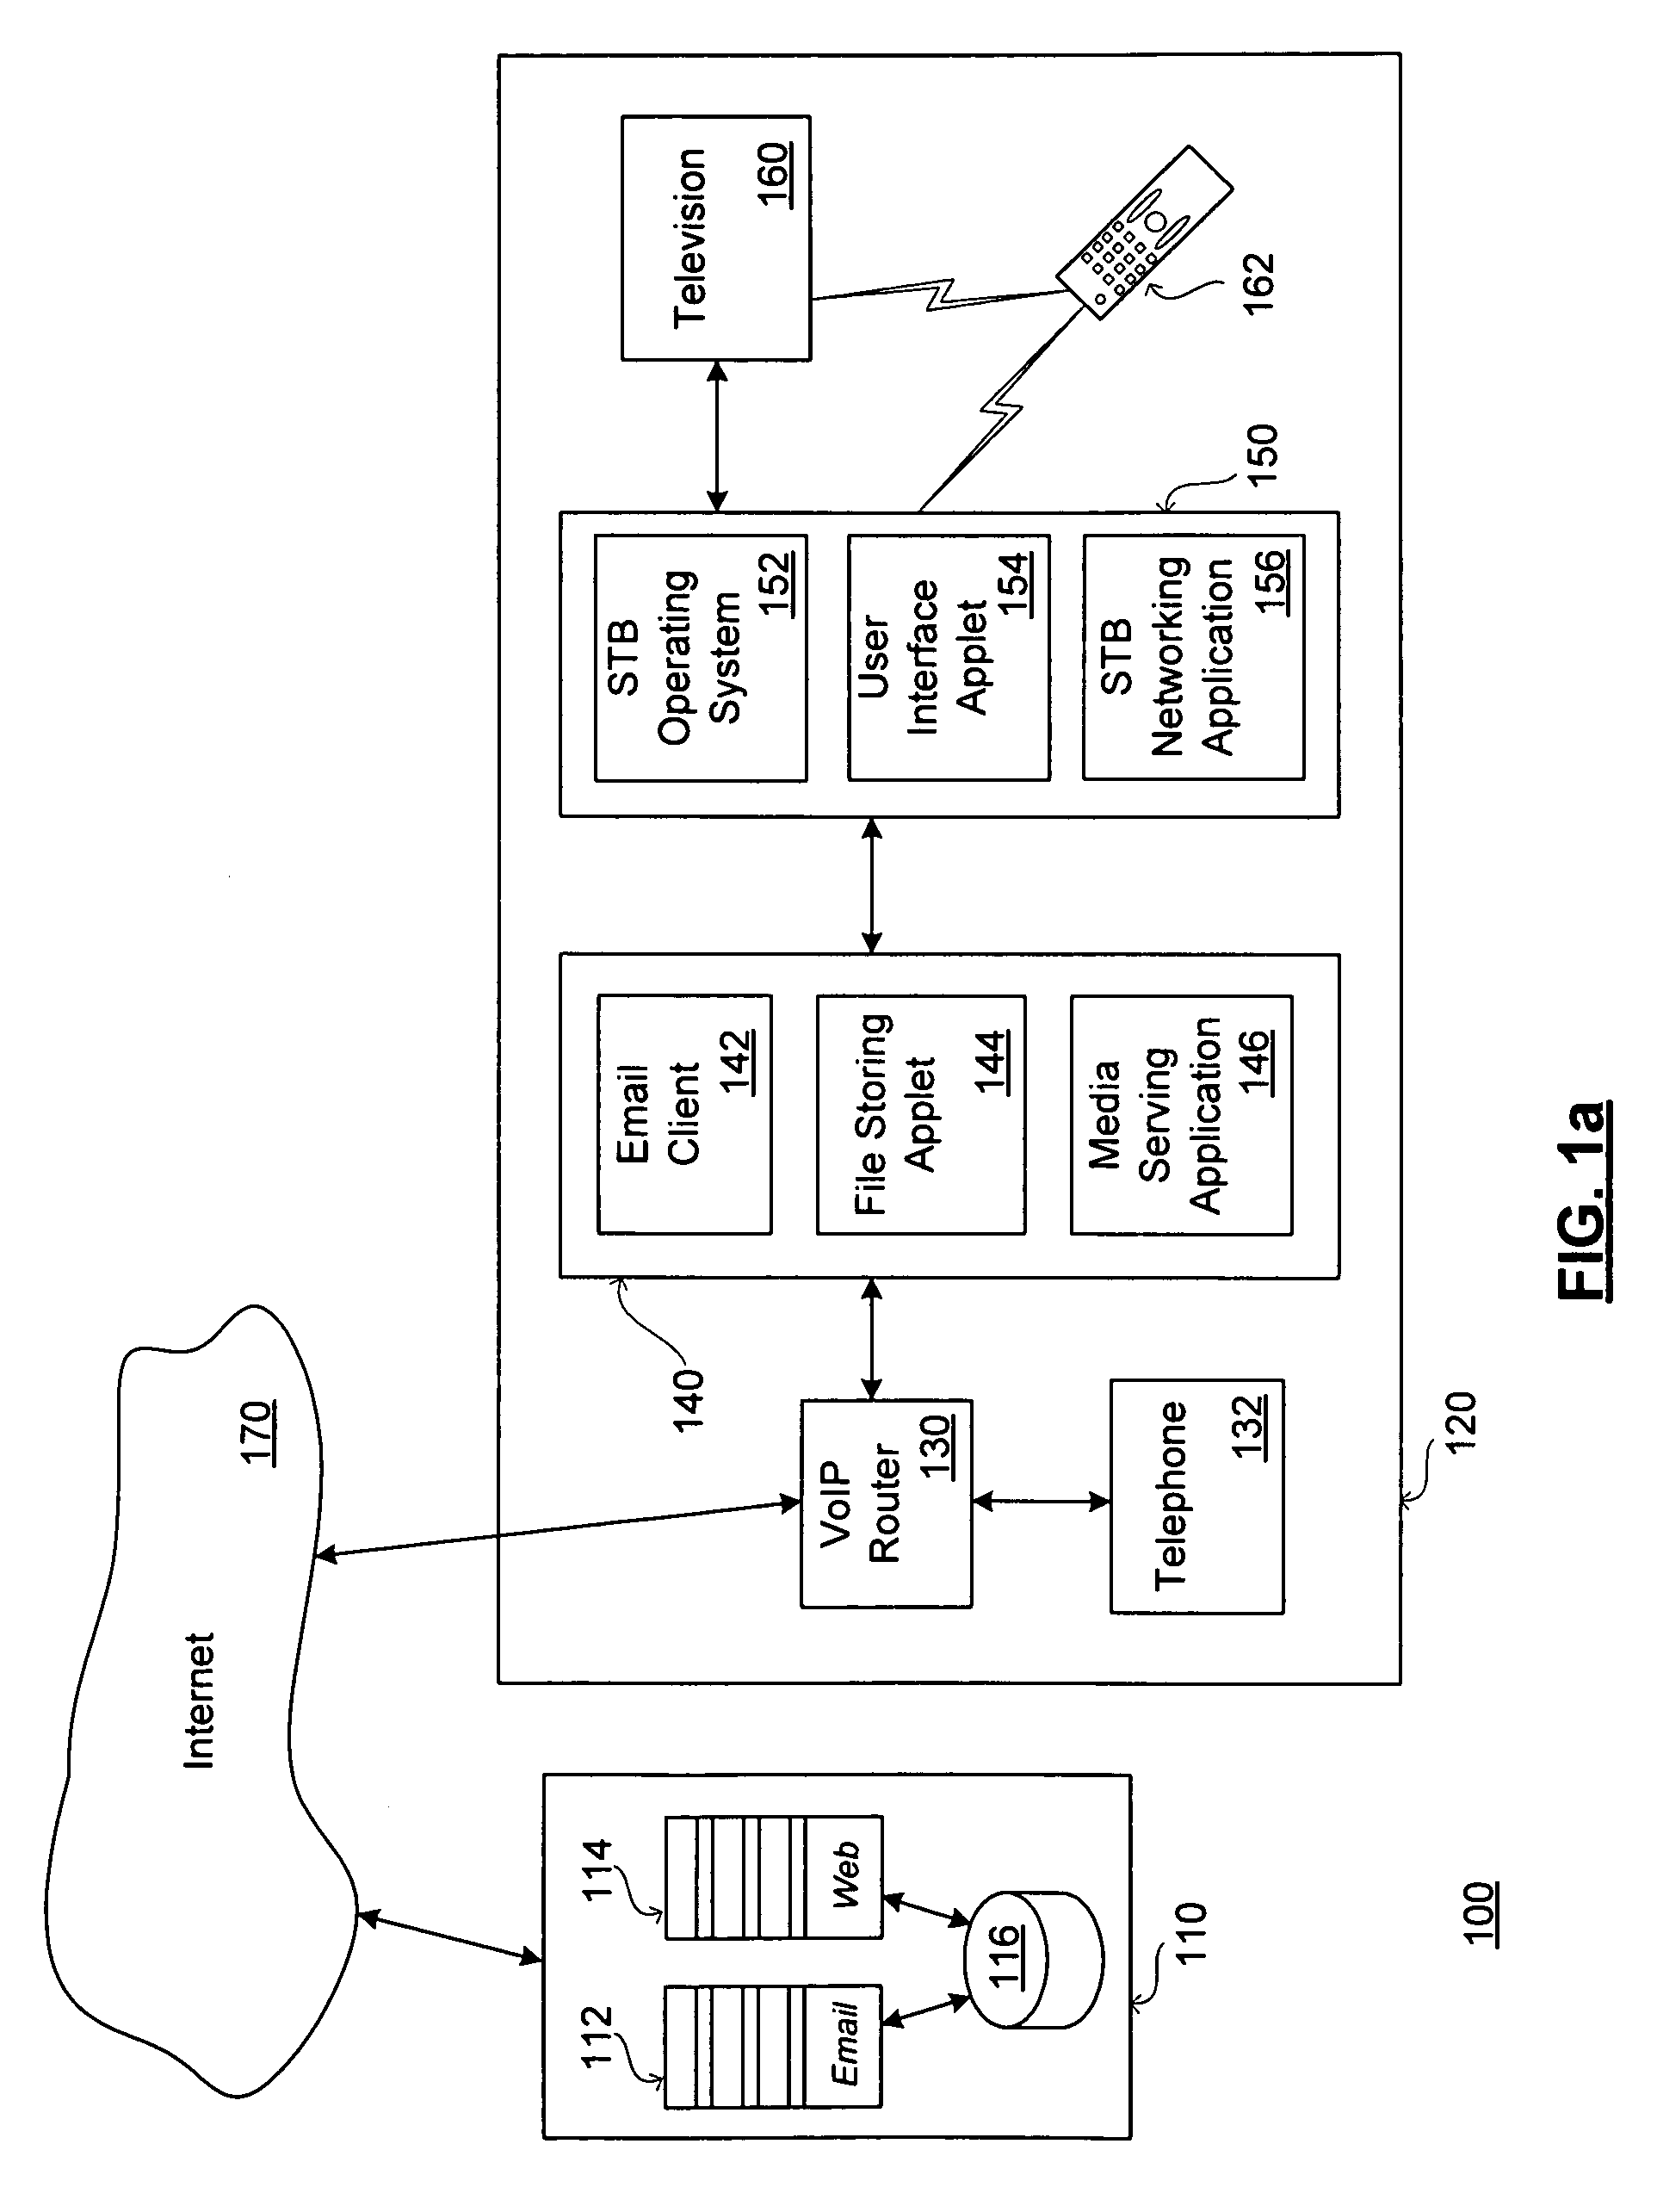 Voicemail interface system and method